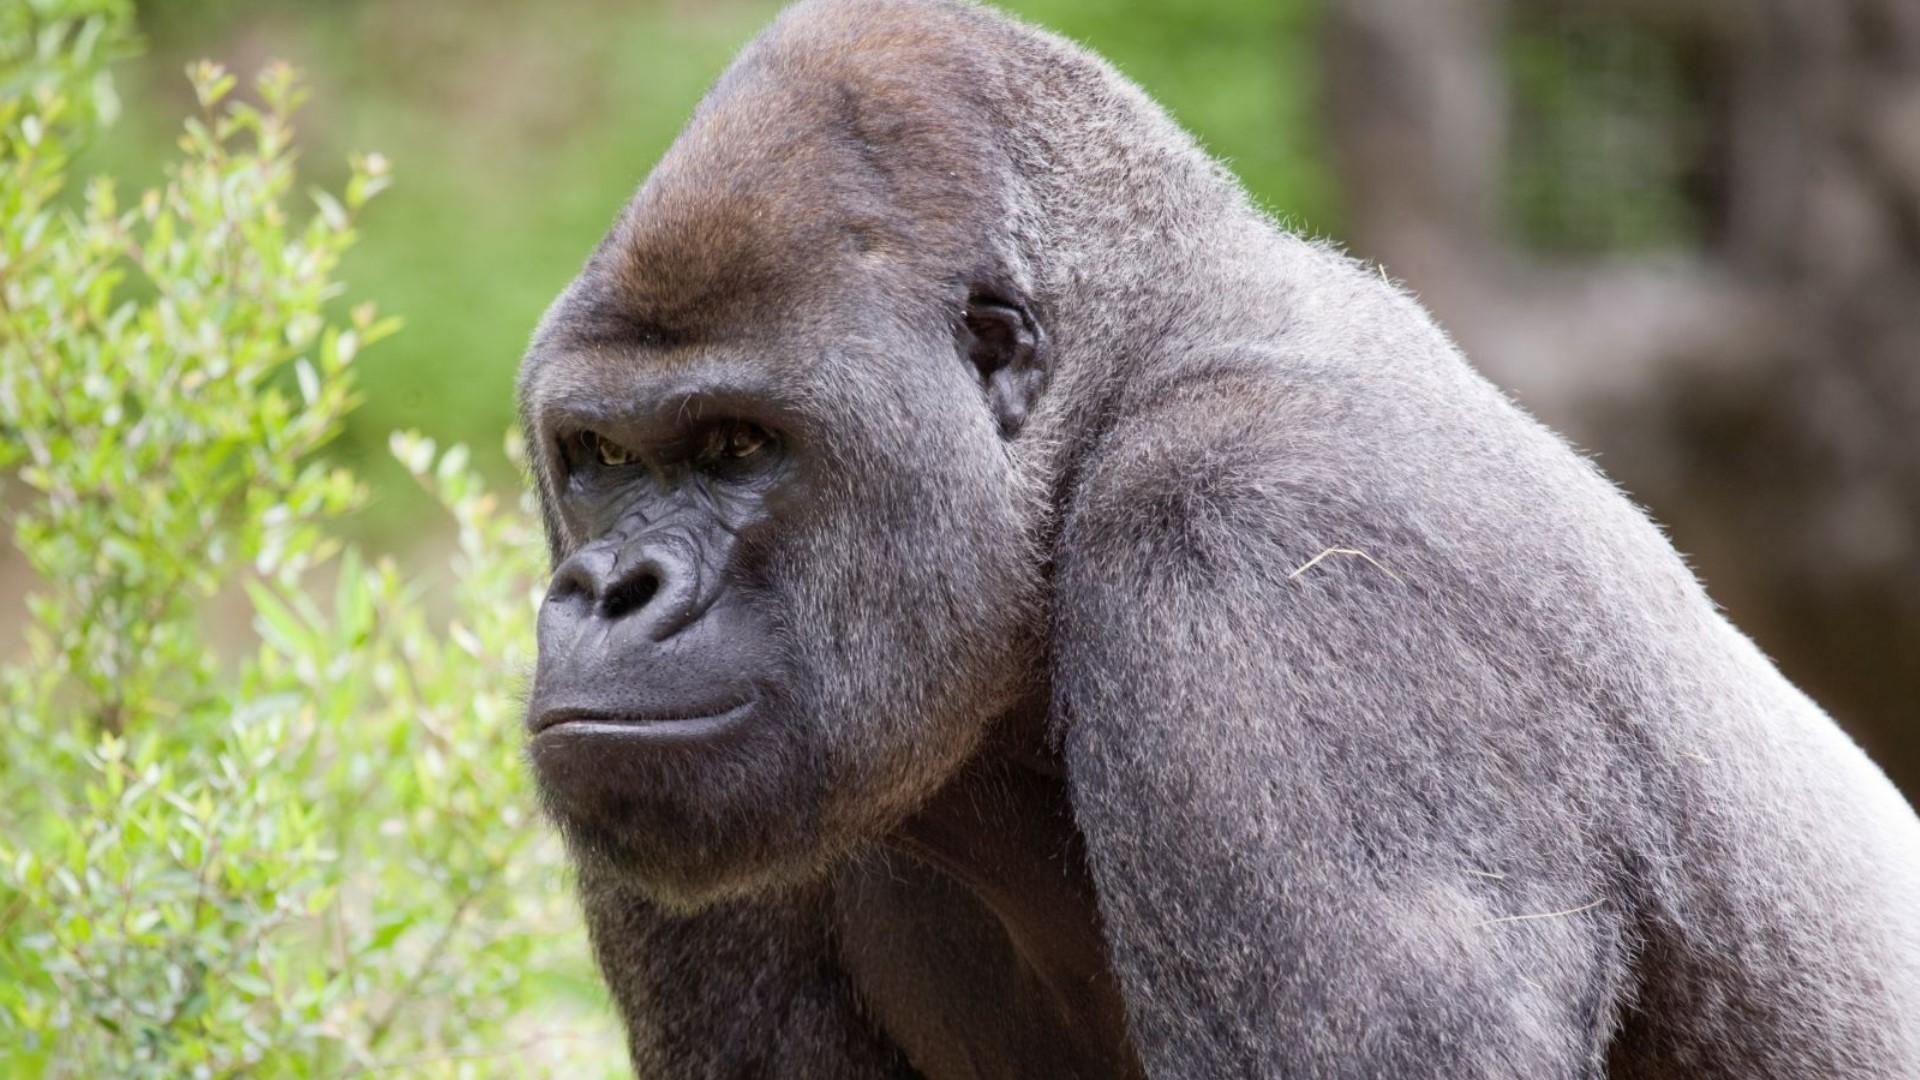 Sept. 24 is World Gorilla Day. Conservationists are working to save them and you can help by using your old cellphone.